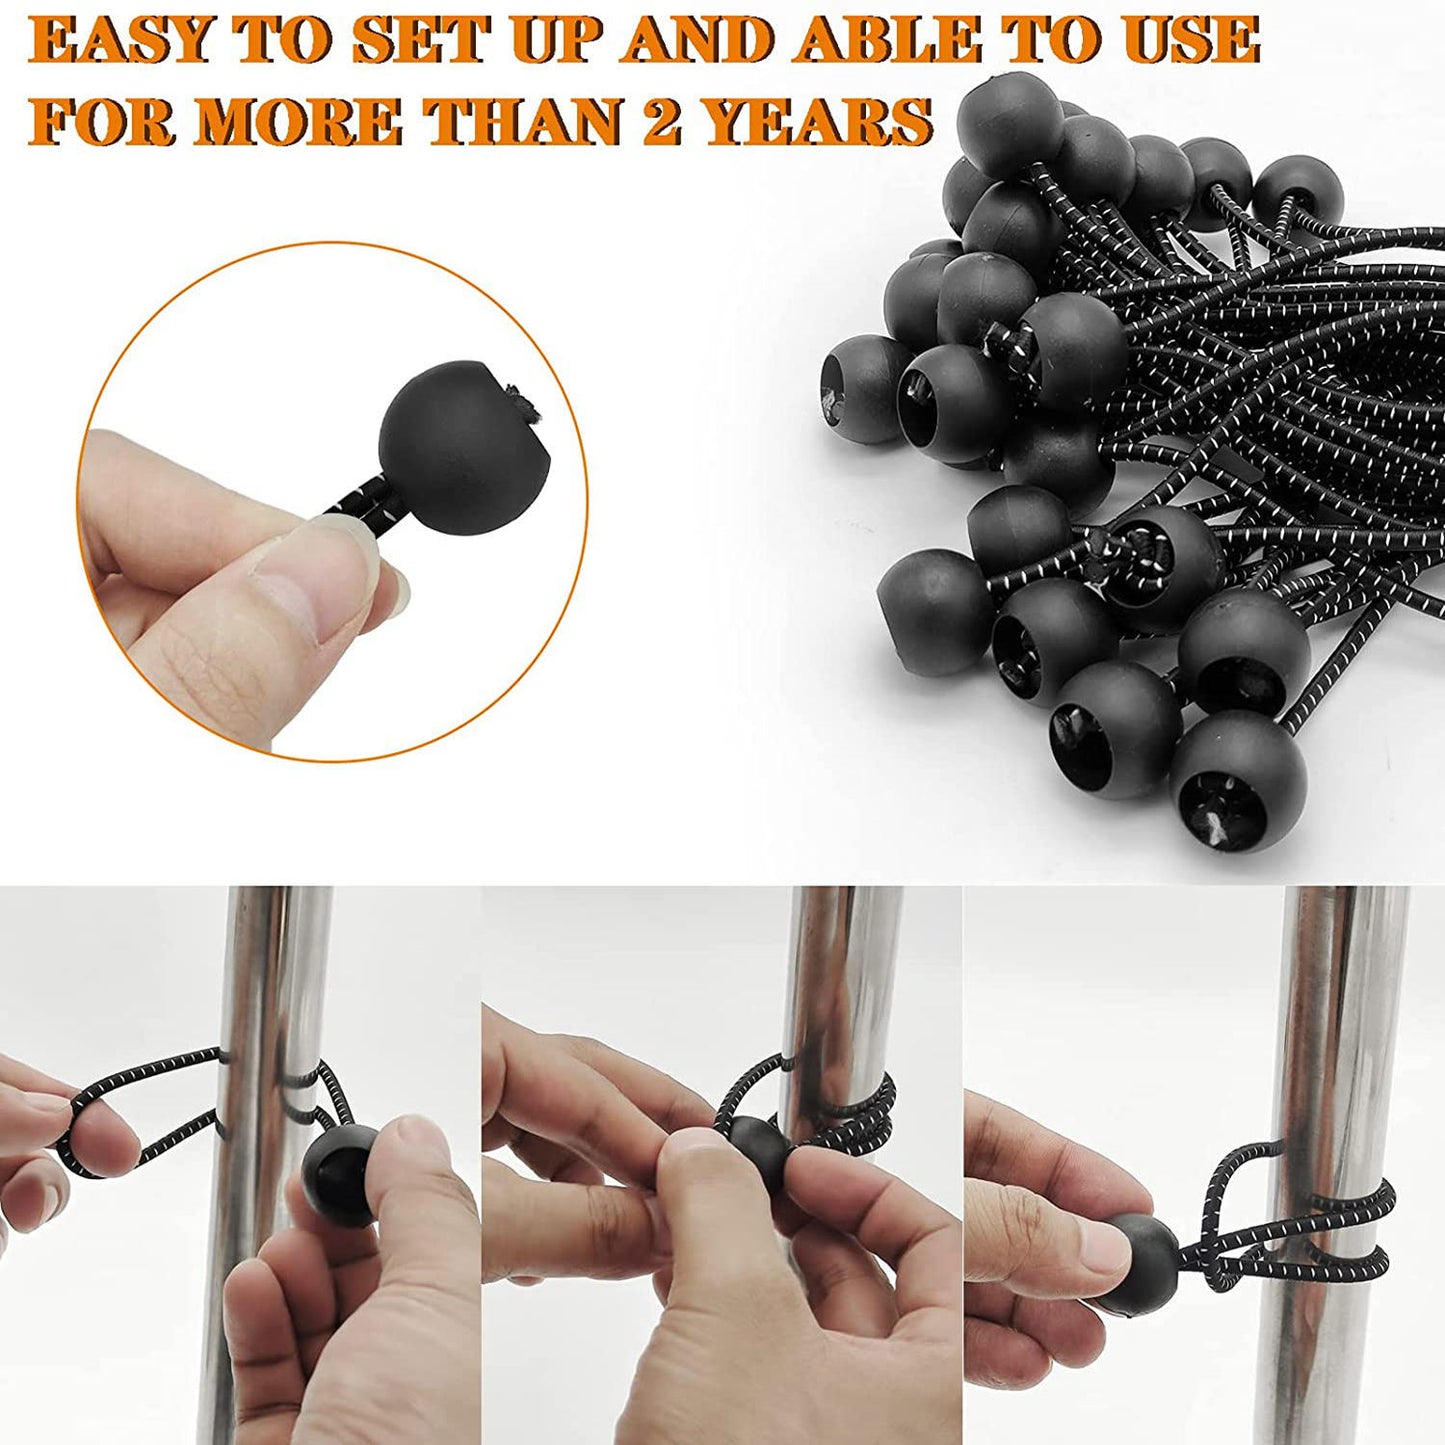 20pcs 6 Inch Bungee Cords, Bungee Balls, Bungee Cords With Balls